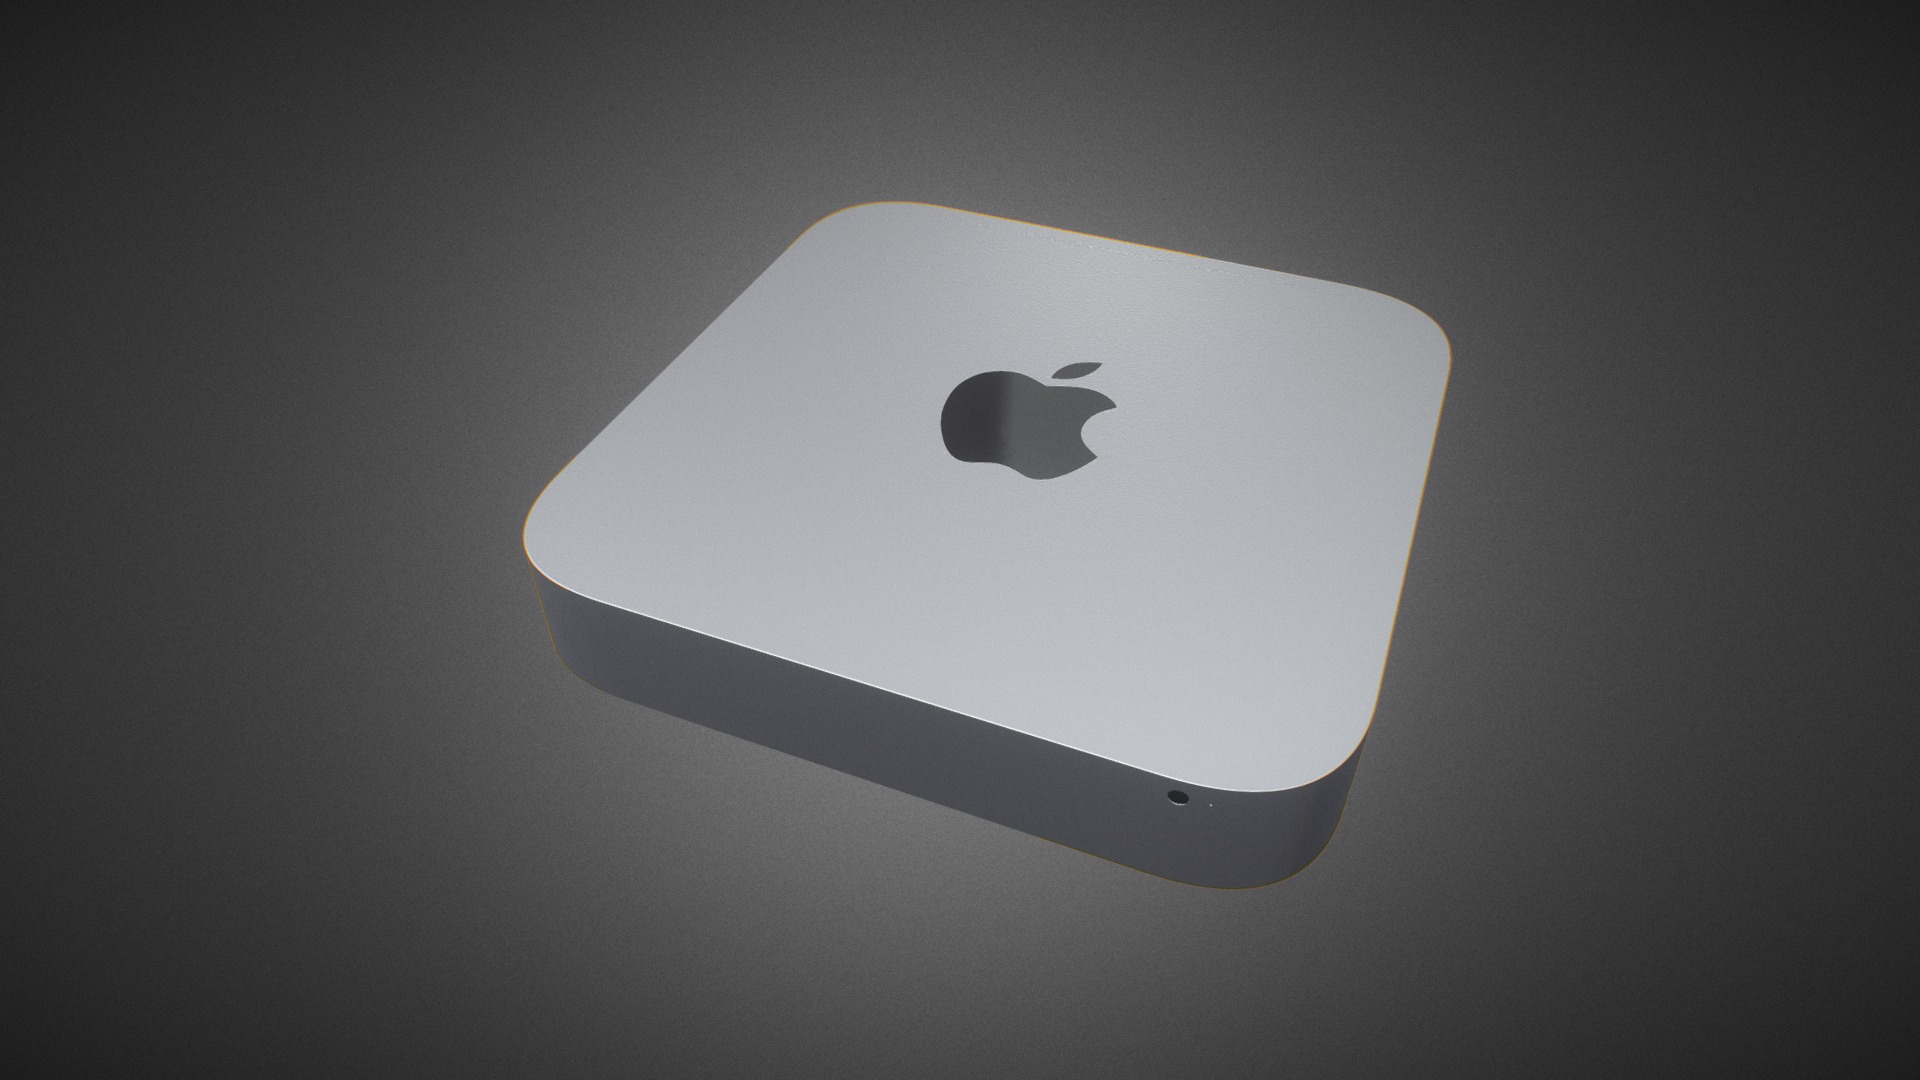 3D model Apple Mac Mini for Element 3D - This is a 3D model of the Apple Mac Mini for Element 3D. The 3D model is about a square white object with a black background.